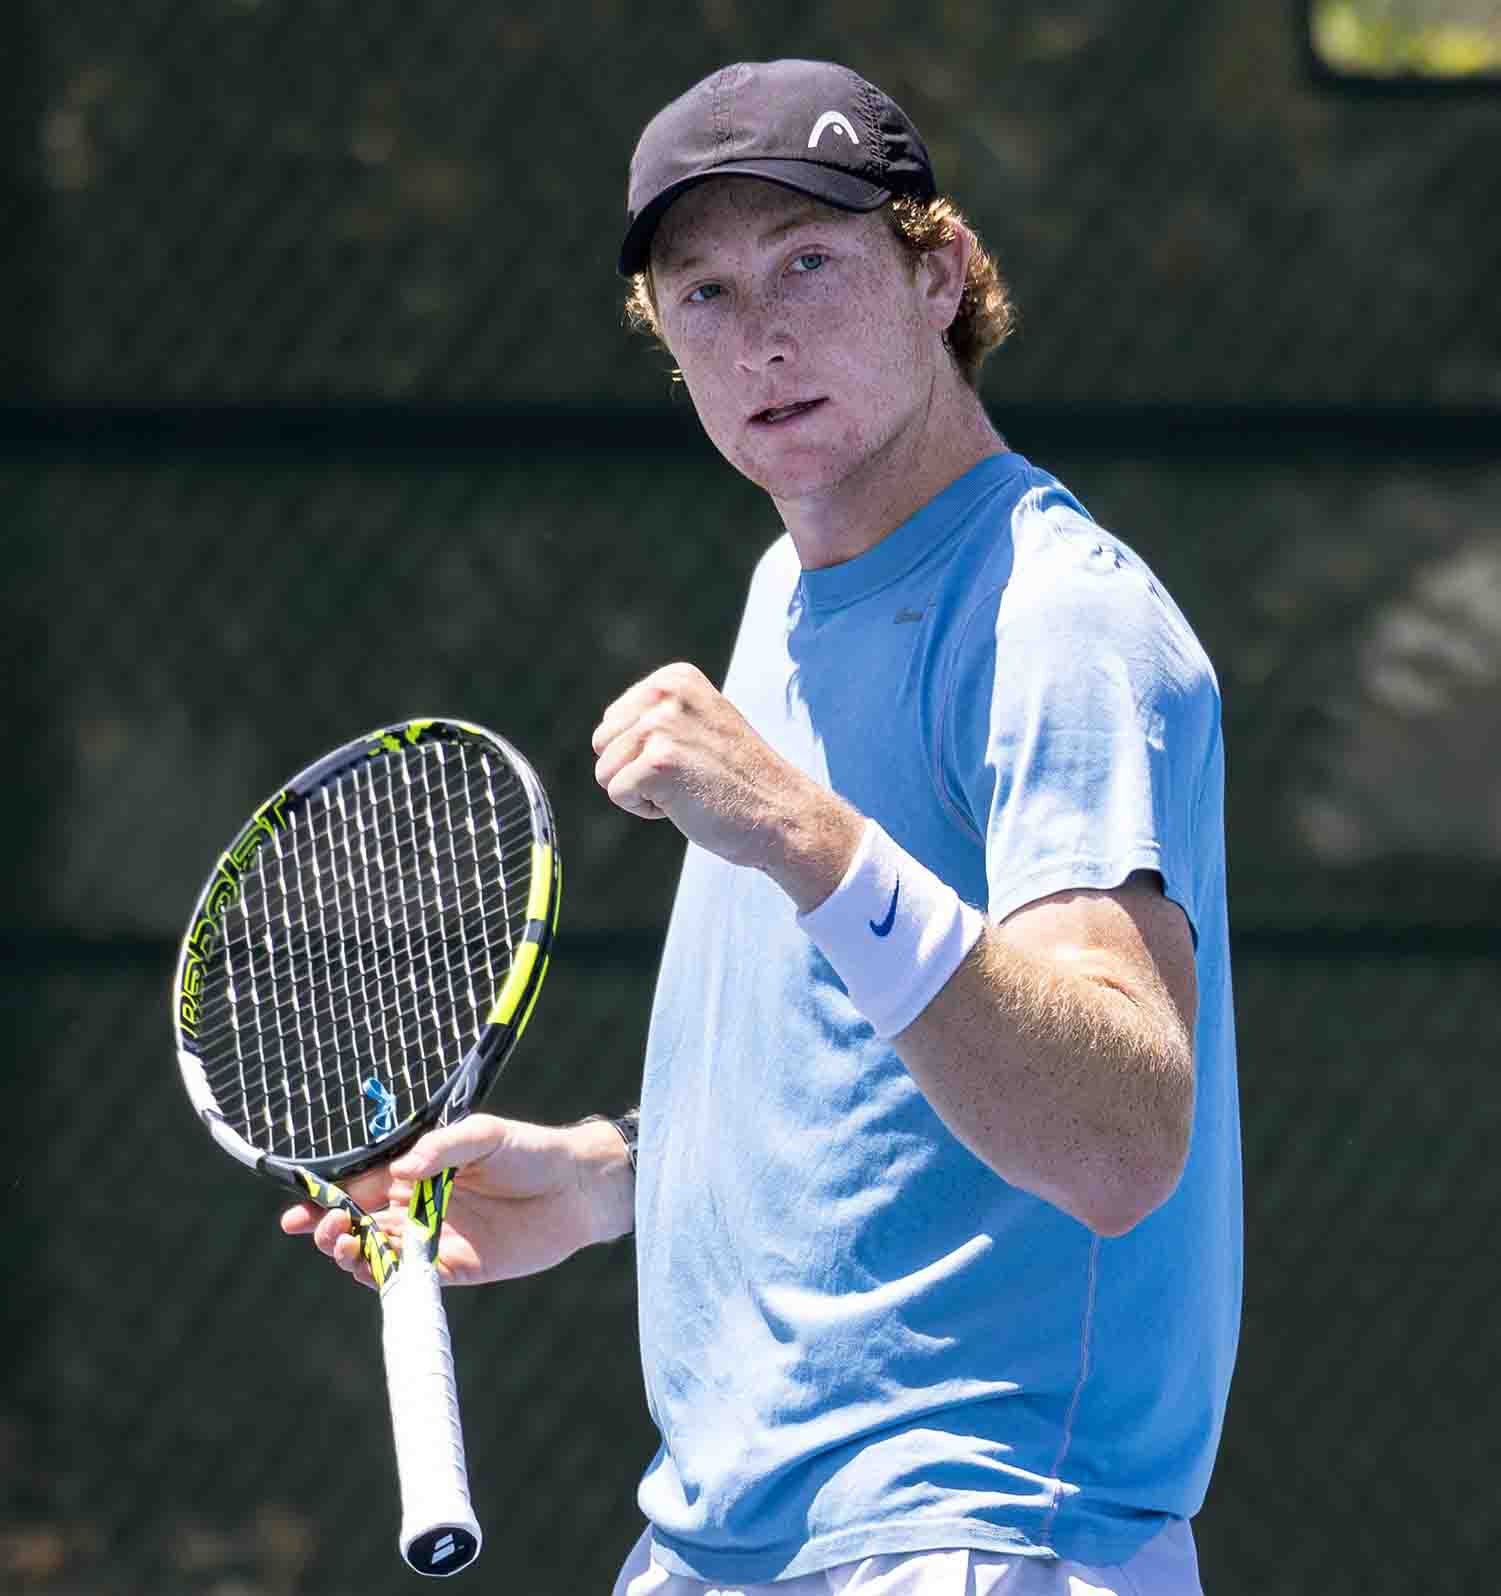 Rising sophomore Spencer Johnson fist pumps at the SoCal Pro Series. (Courtesy of USTA SoCal/Jon Mulvey)